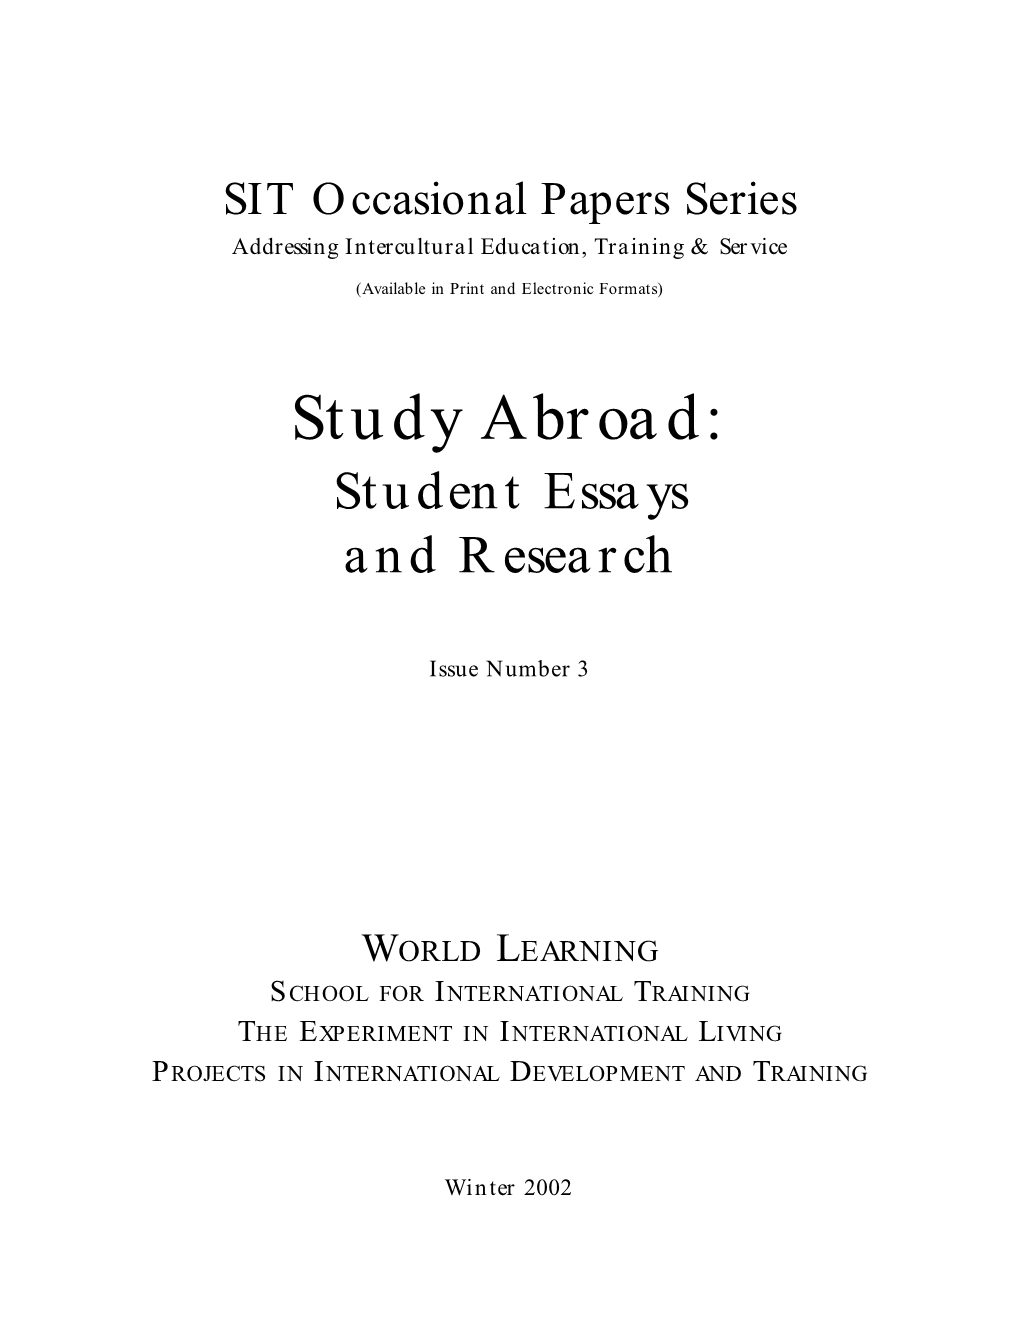 Study Abroad: Student Essays and Research